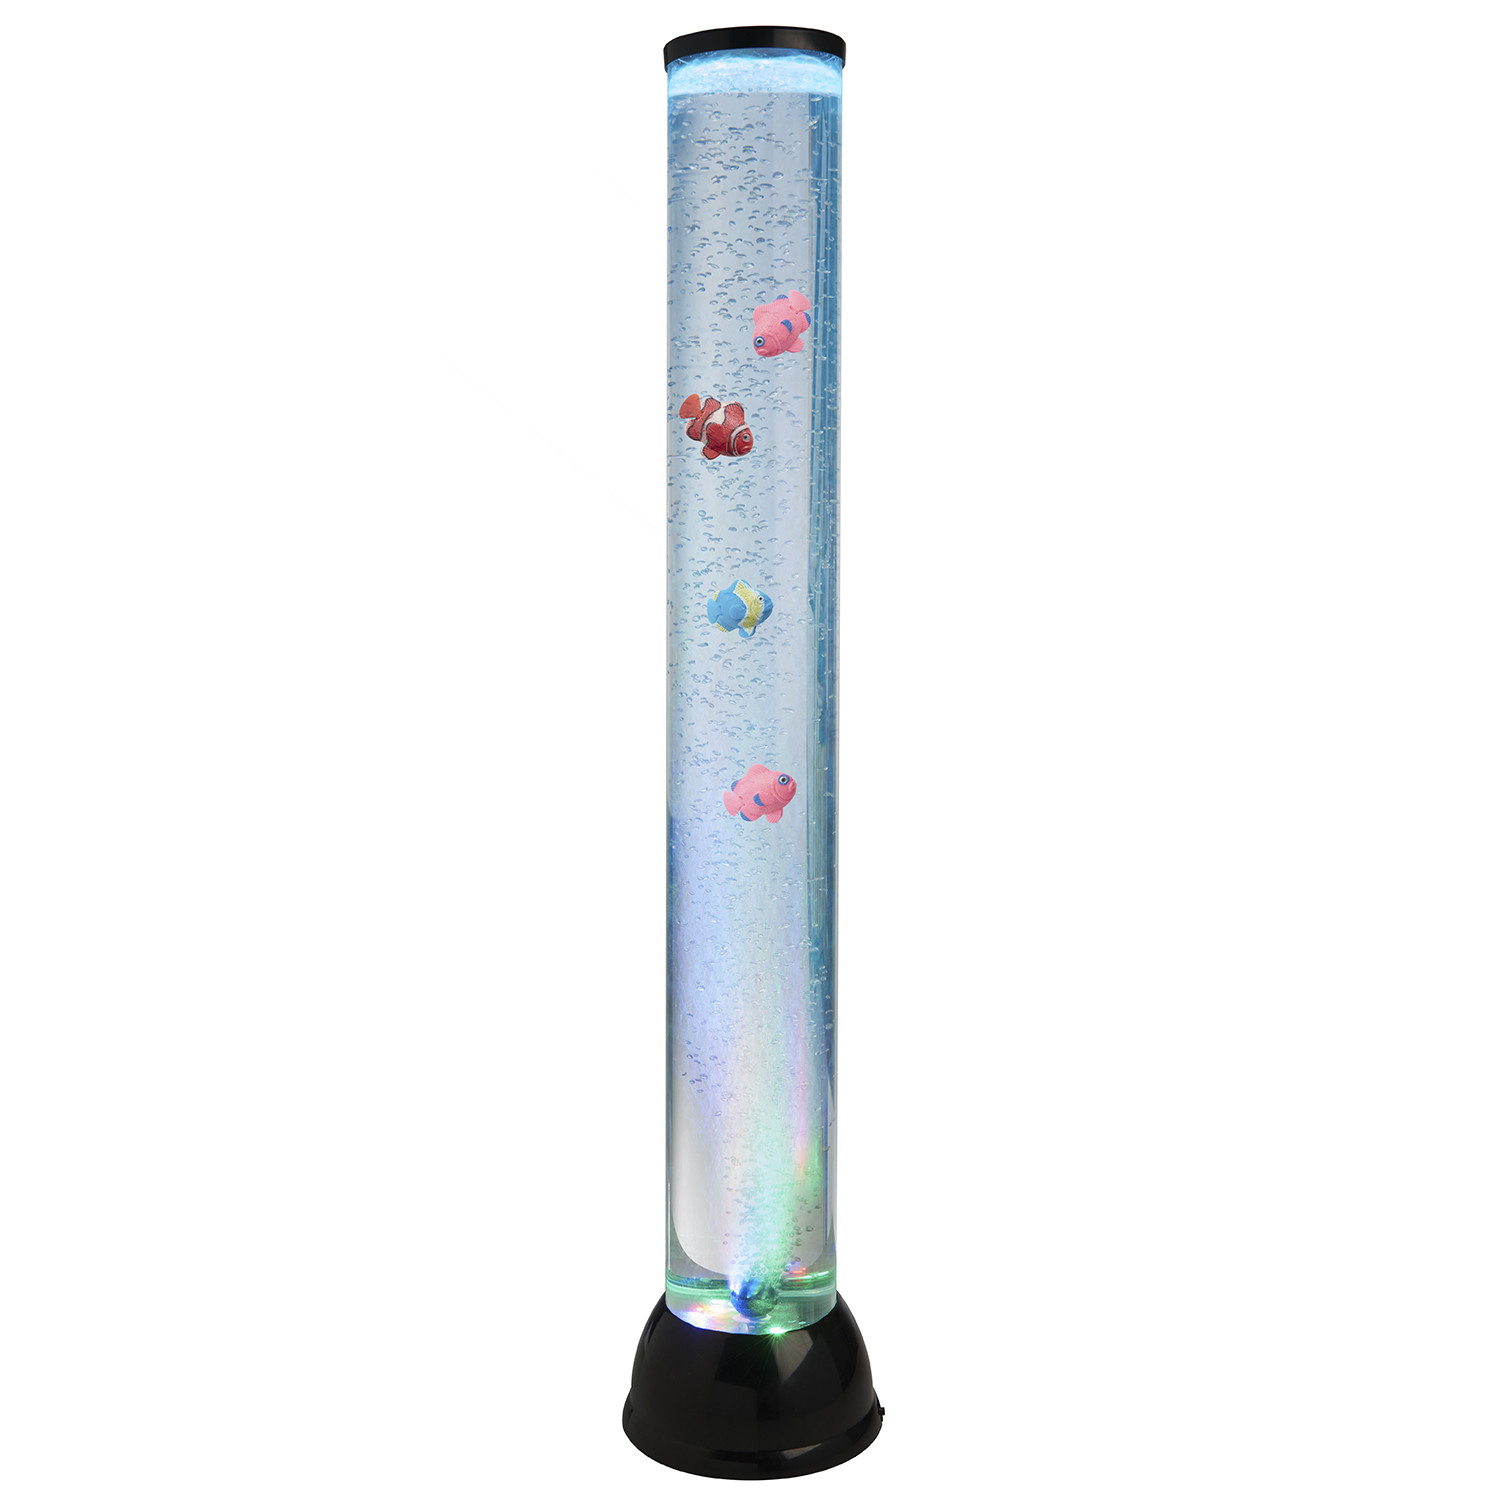 Tall Colour Changing Bubble Fish Decorative Floor Lamp Image 2